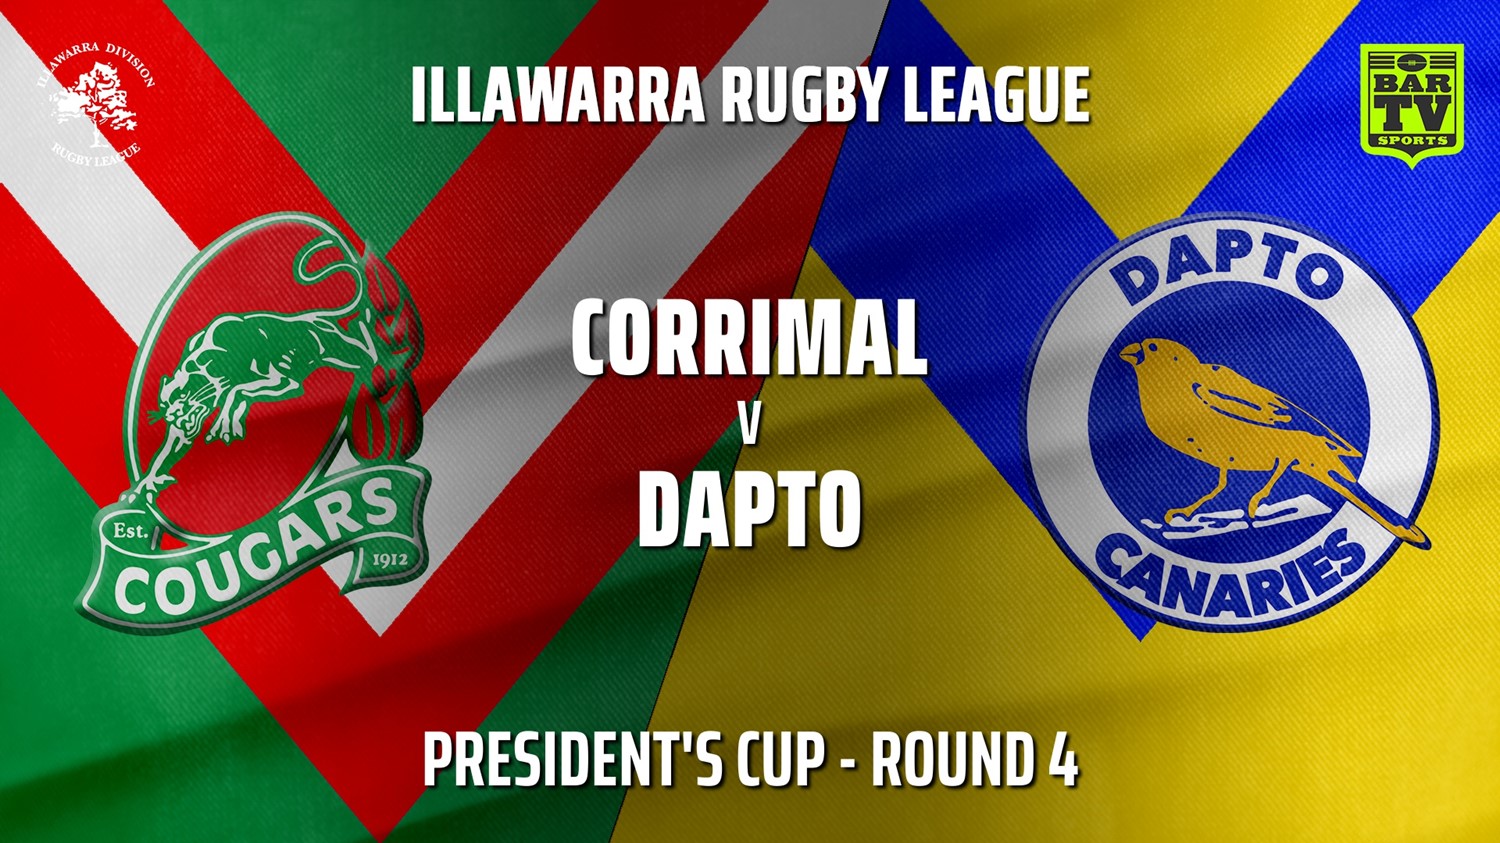 210501-IRL Round 4 - President's Cup - Corrimal Cougars v Dapto Canaries Slate Image